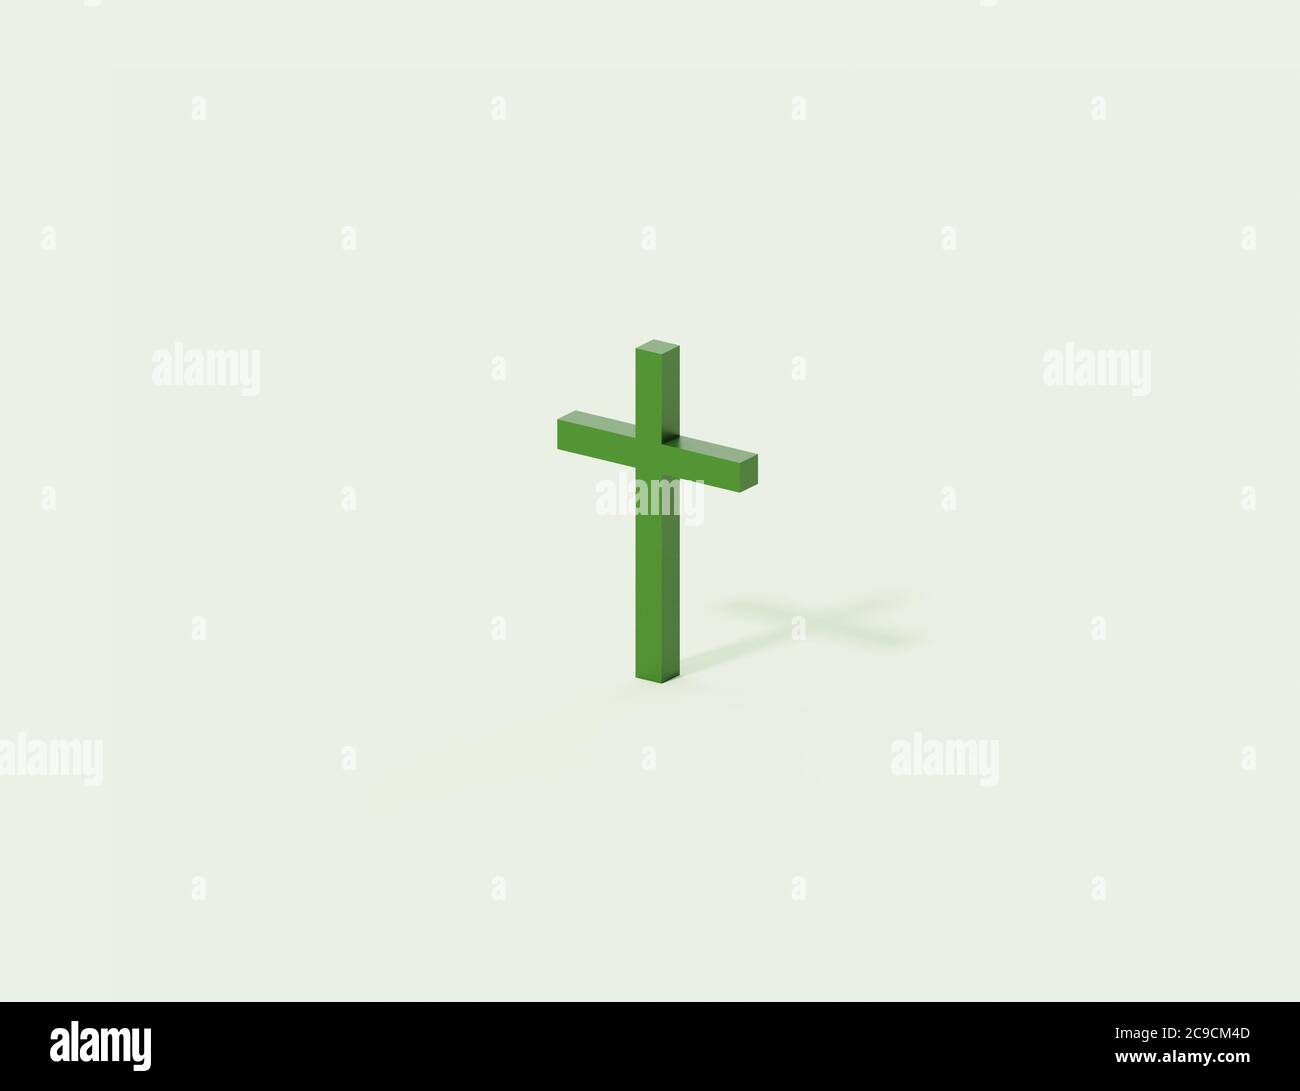 Christian cross isometric view on light background with realistic shadow, 3D illustration Stock Photo